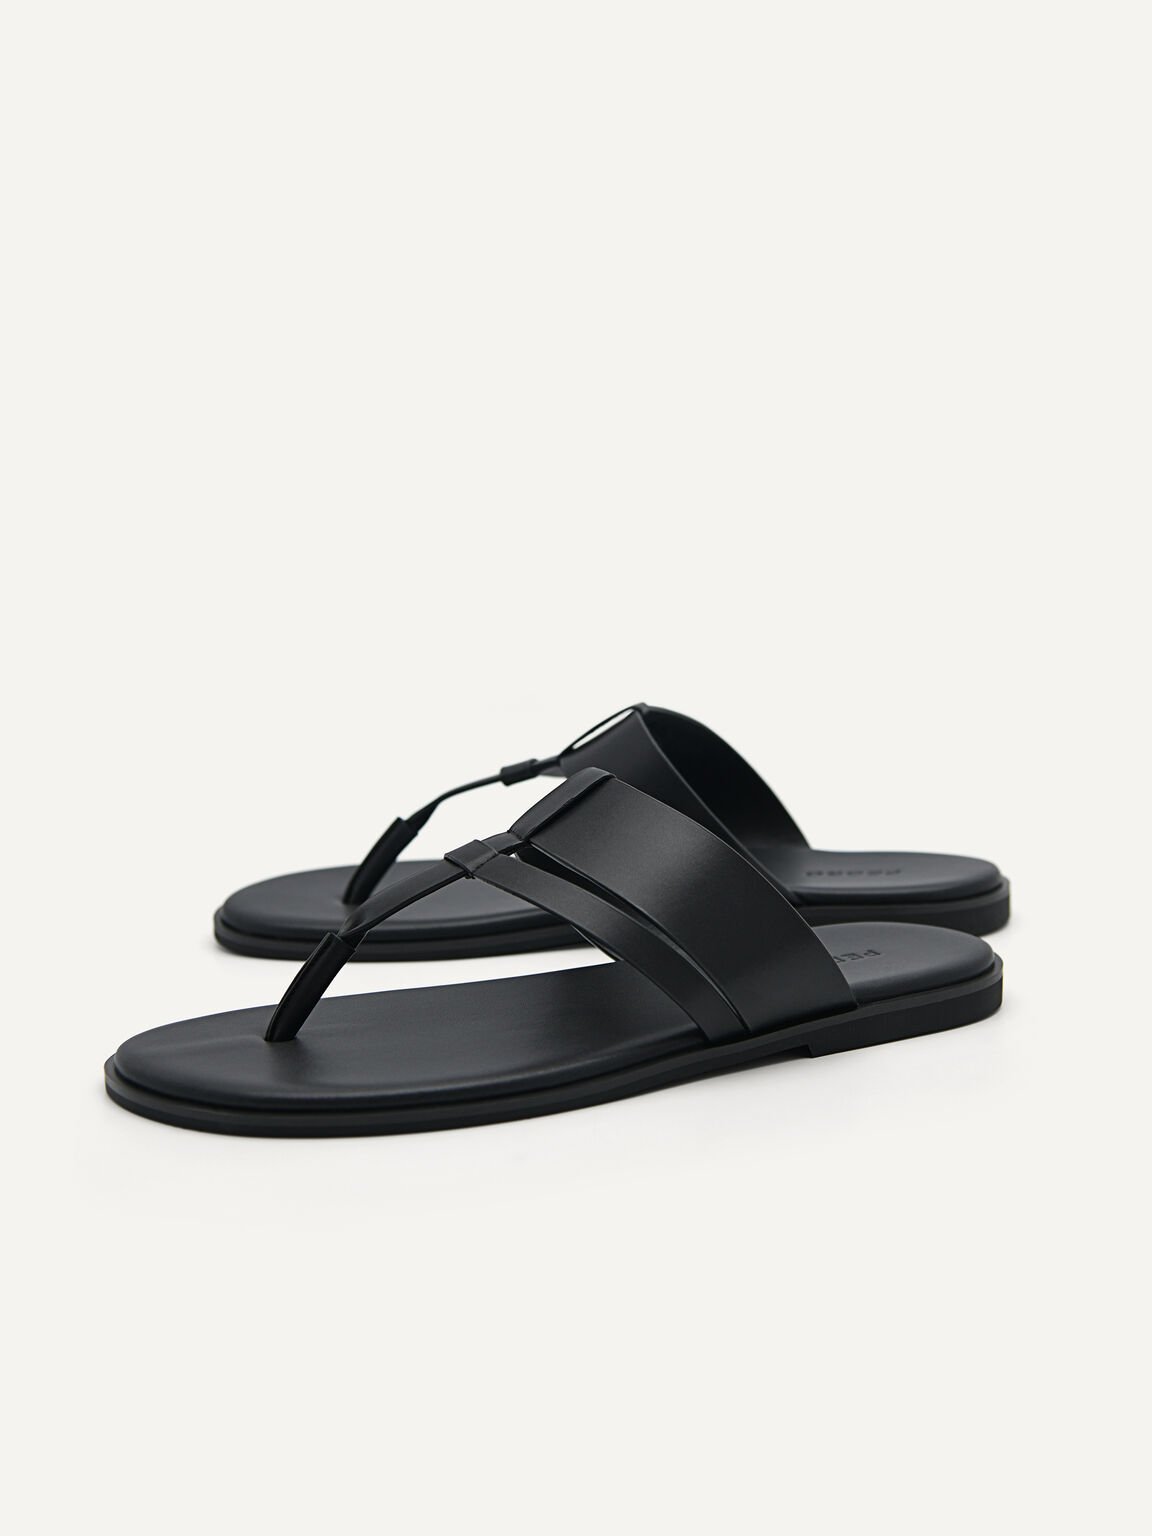 Synthetic Leather Grid Thong Sandals, Black